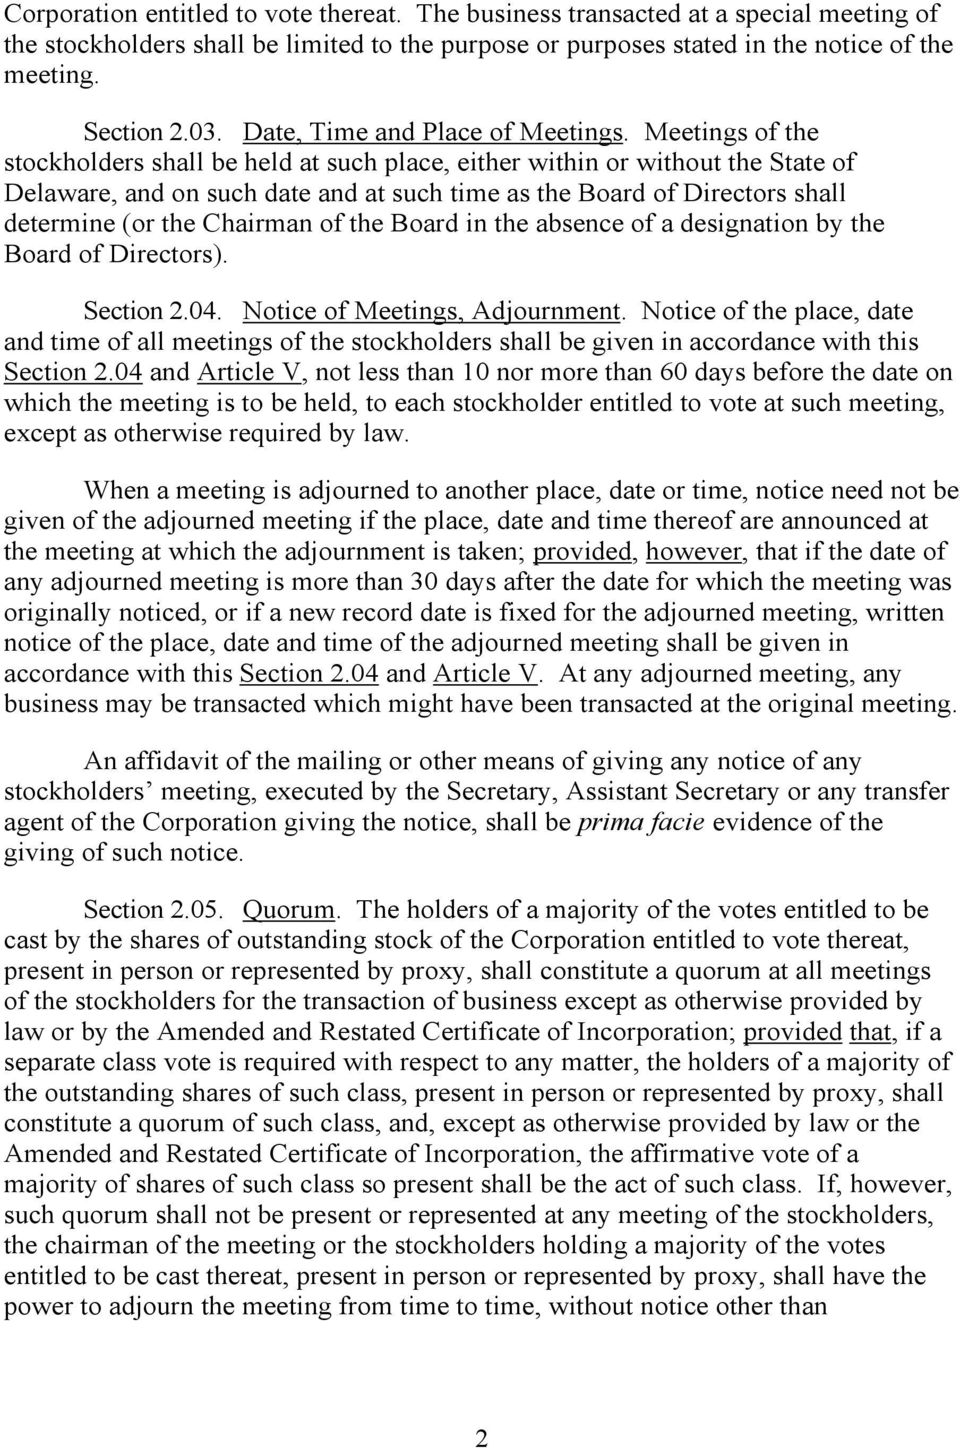 Meetings of the stockholders shall be held at such place, either within or without the State of Delaware, and on such date and at such time as the Board of Directors shall determine (or the Chairman